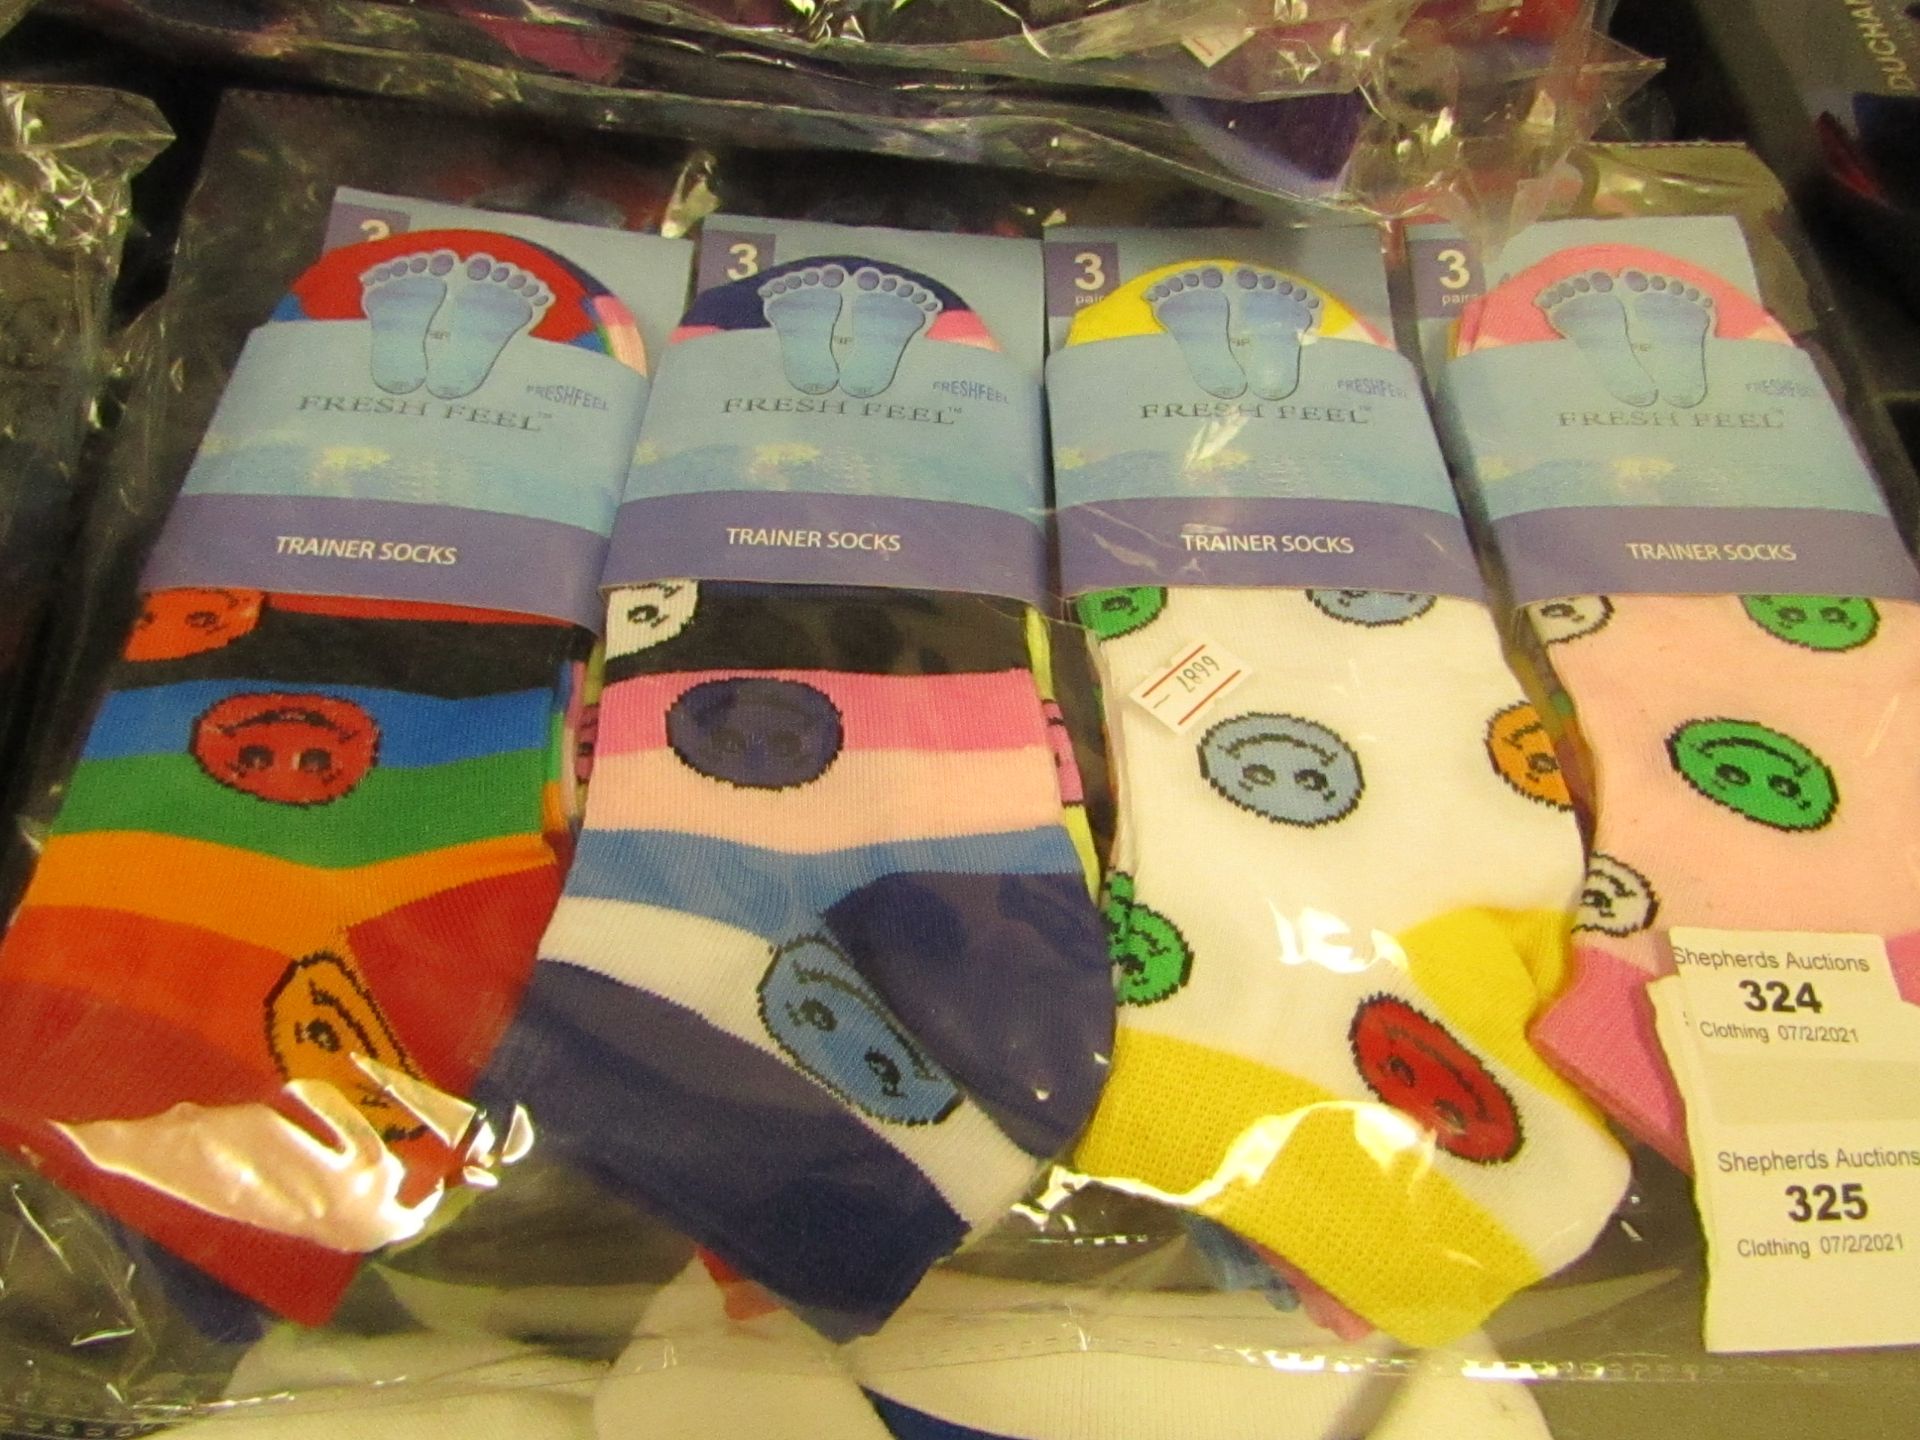 12 X Pairs of Fresh Feel Ladies Trainer Socks size 4-6 New & Packaged